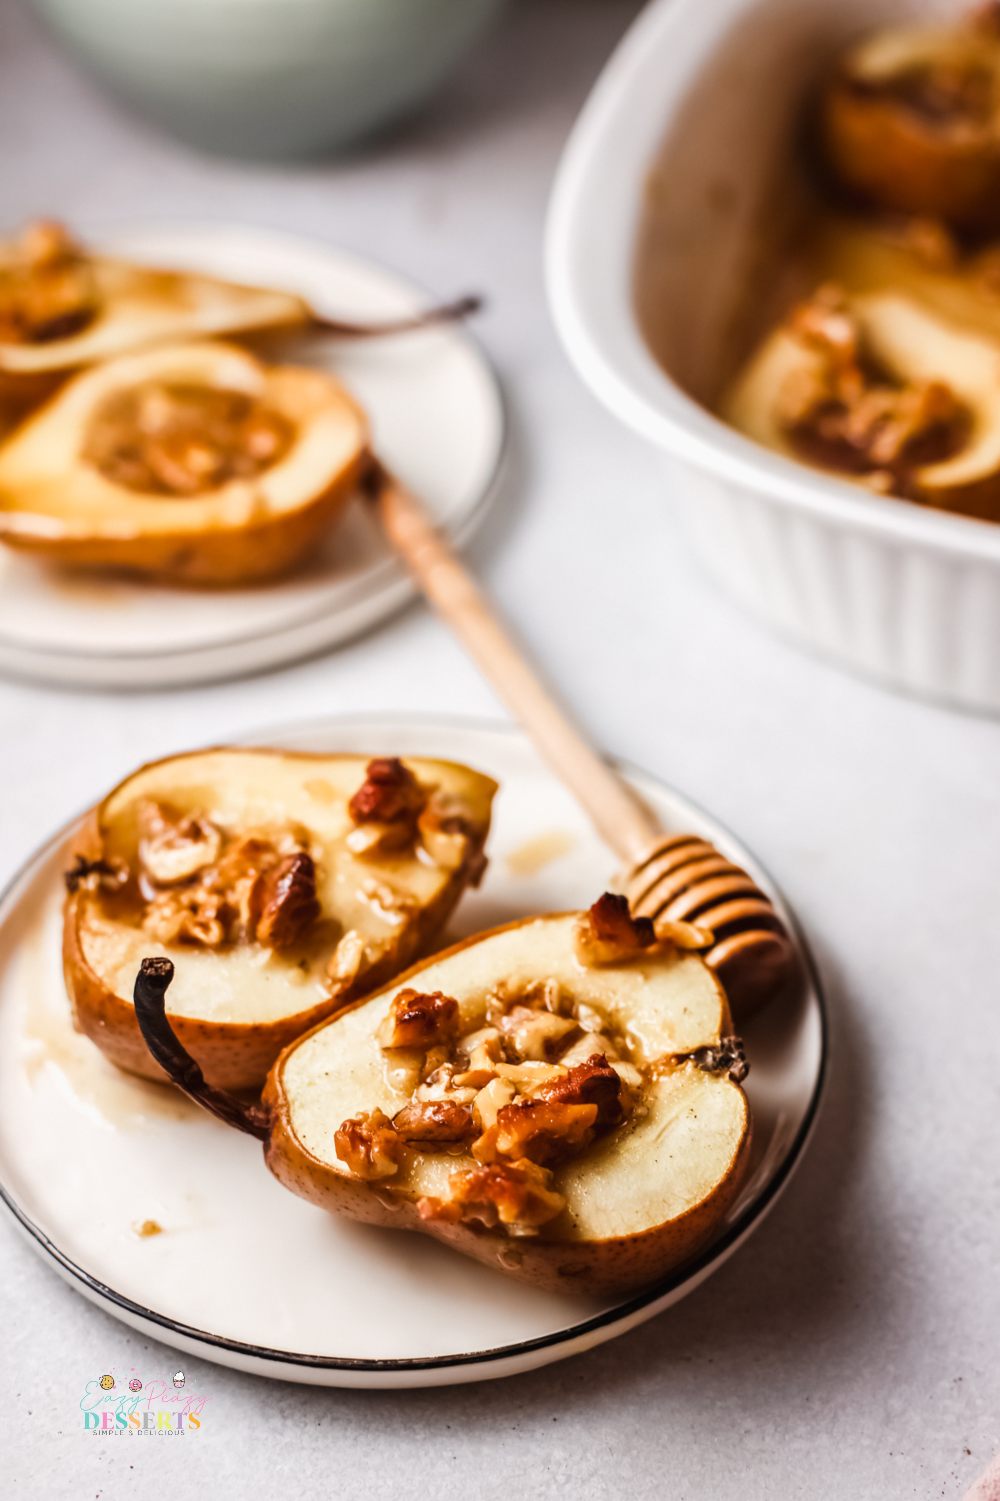 Cinnamon baked pears in a dessert plate